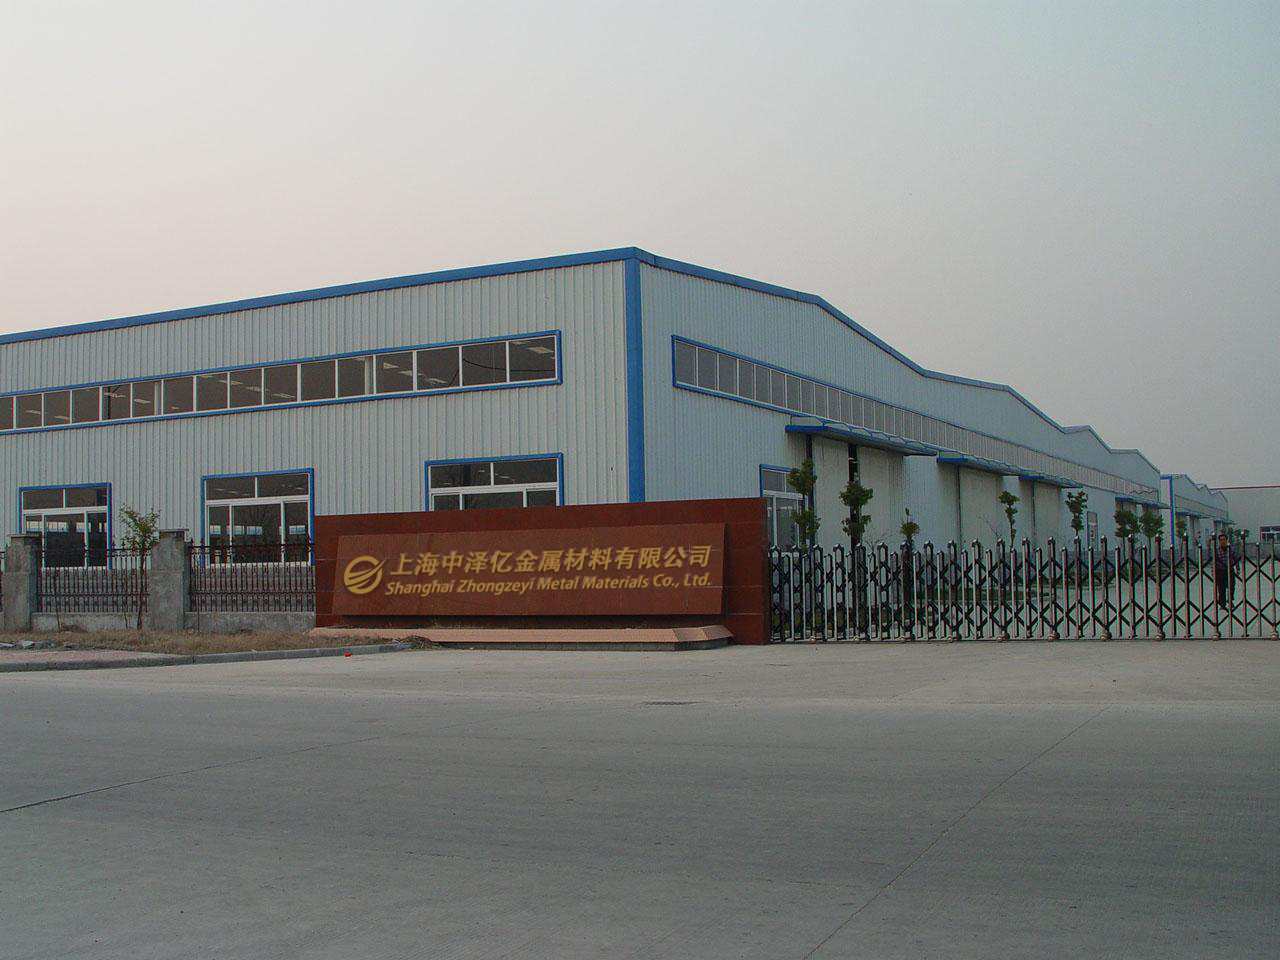 Shanghai Zhongze Yi Metal Materials Co., Ltd. stands out in the industry with its strong company scale and professional team.